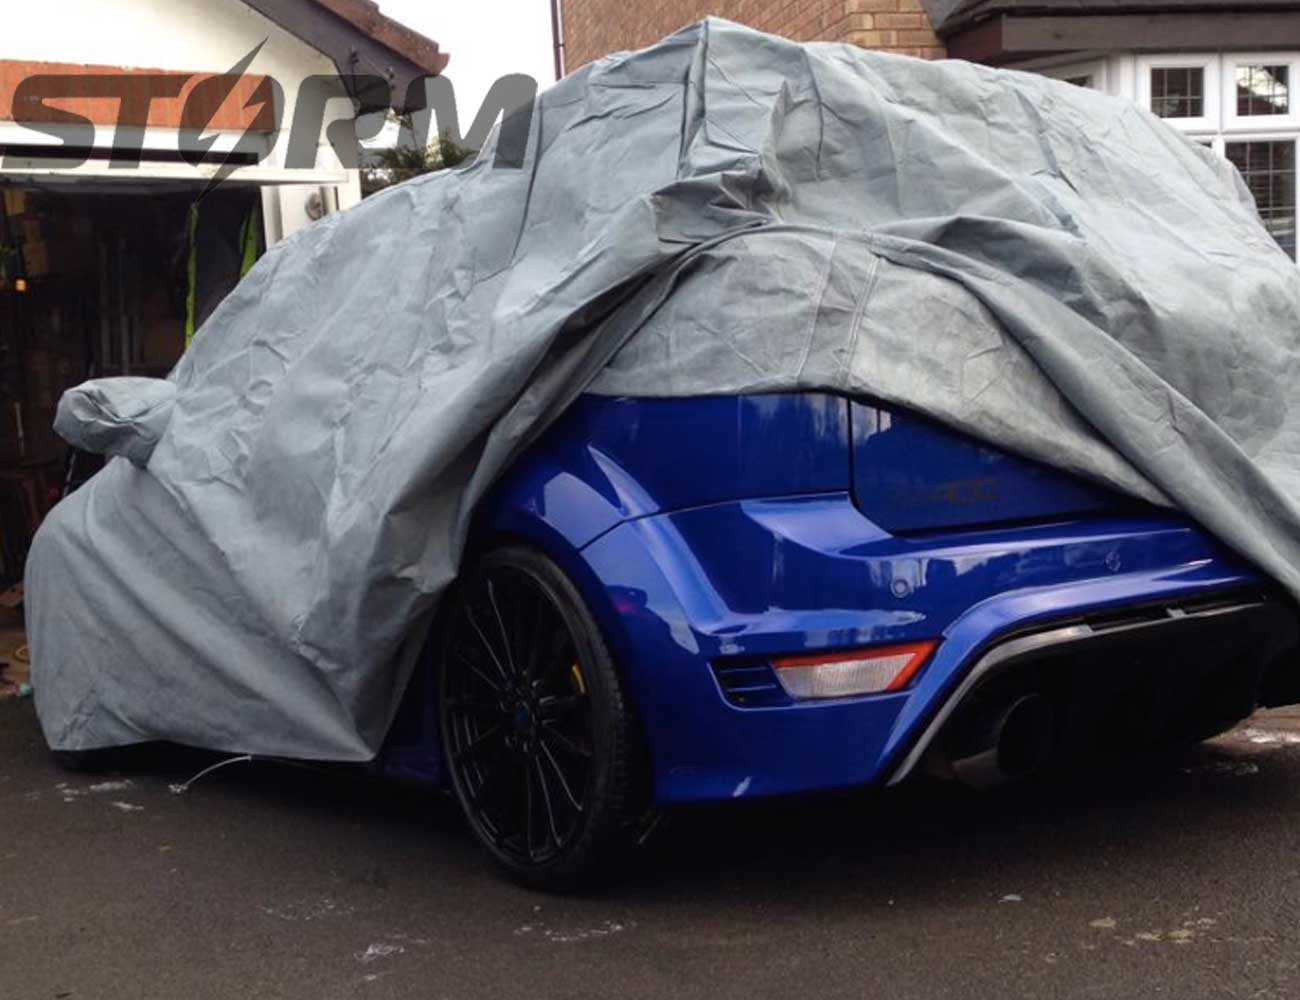 Stormforce outdoor breathable car covers for FORD (EUROPE) - Storm Car  Covers